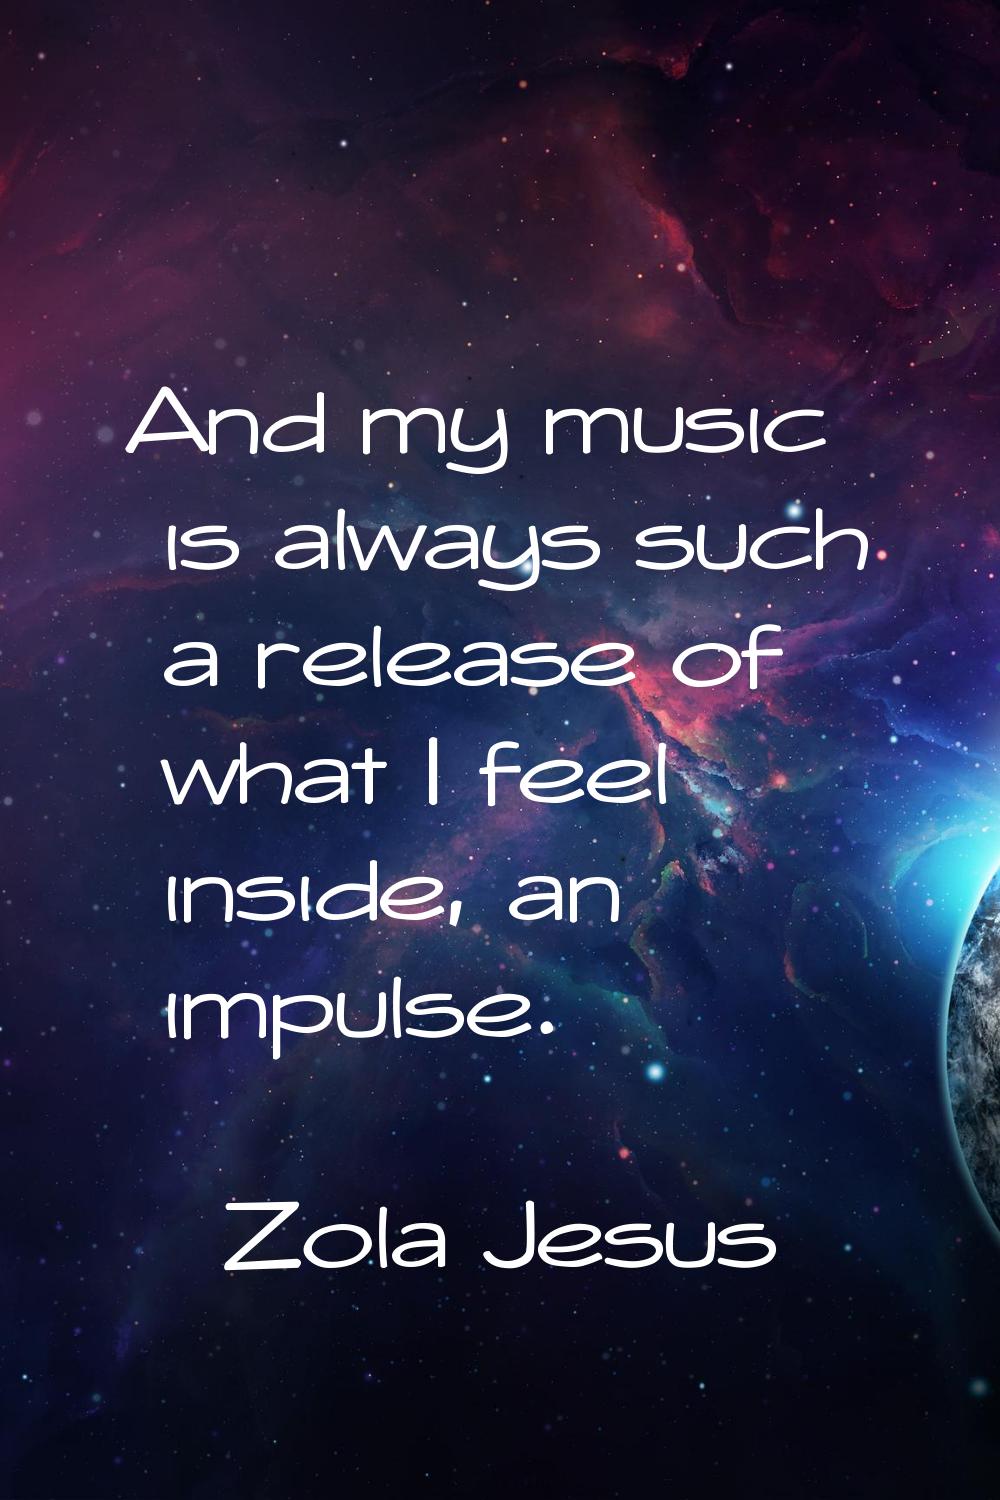 And my music is always such a release of what I feel inside, an impulse.